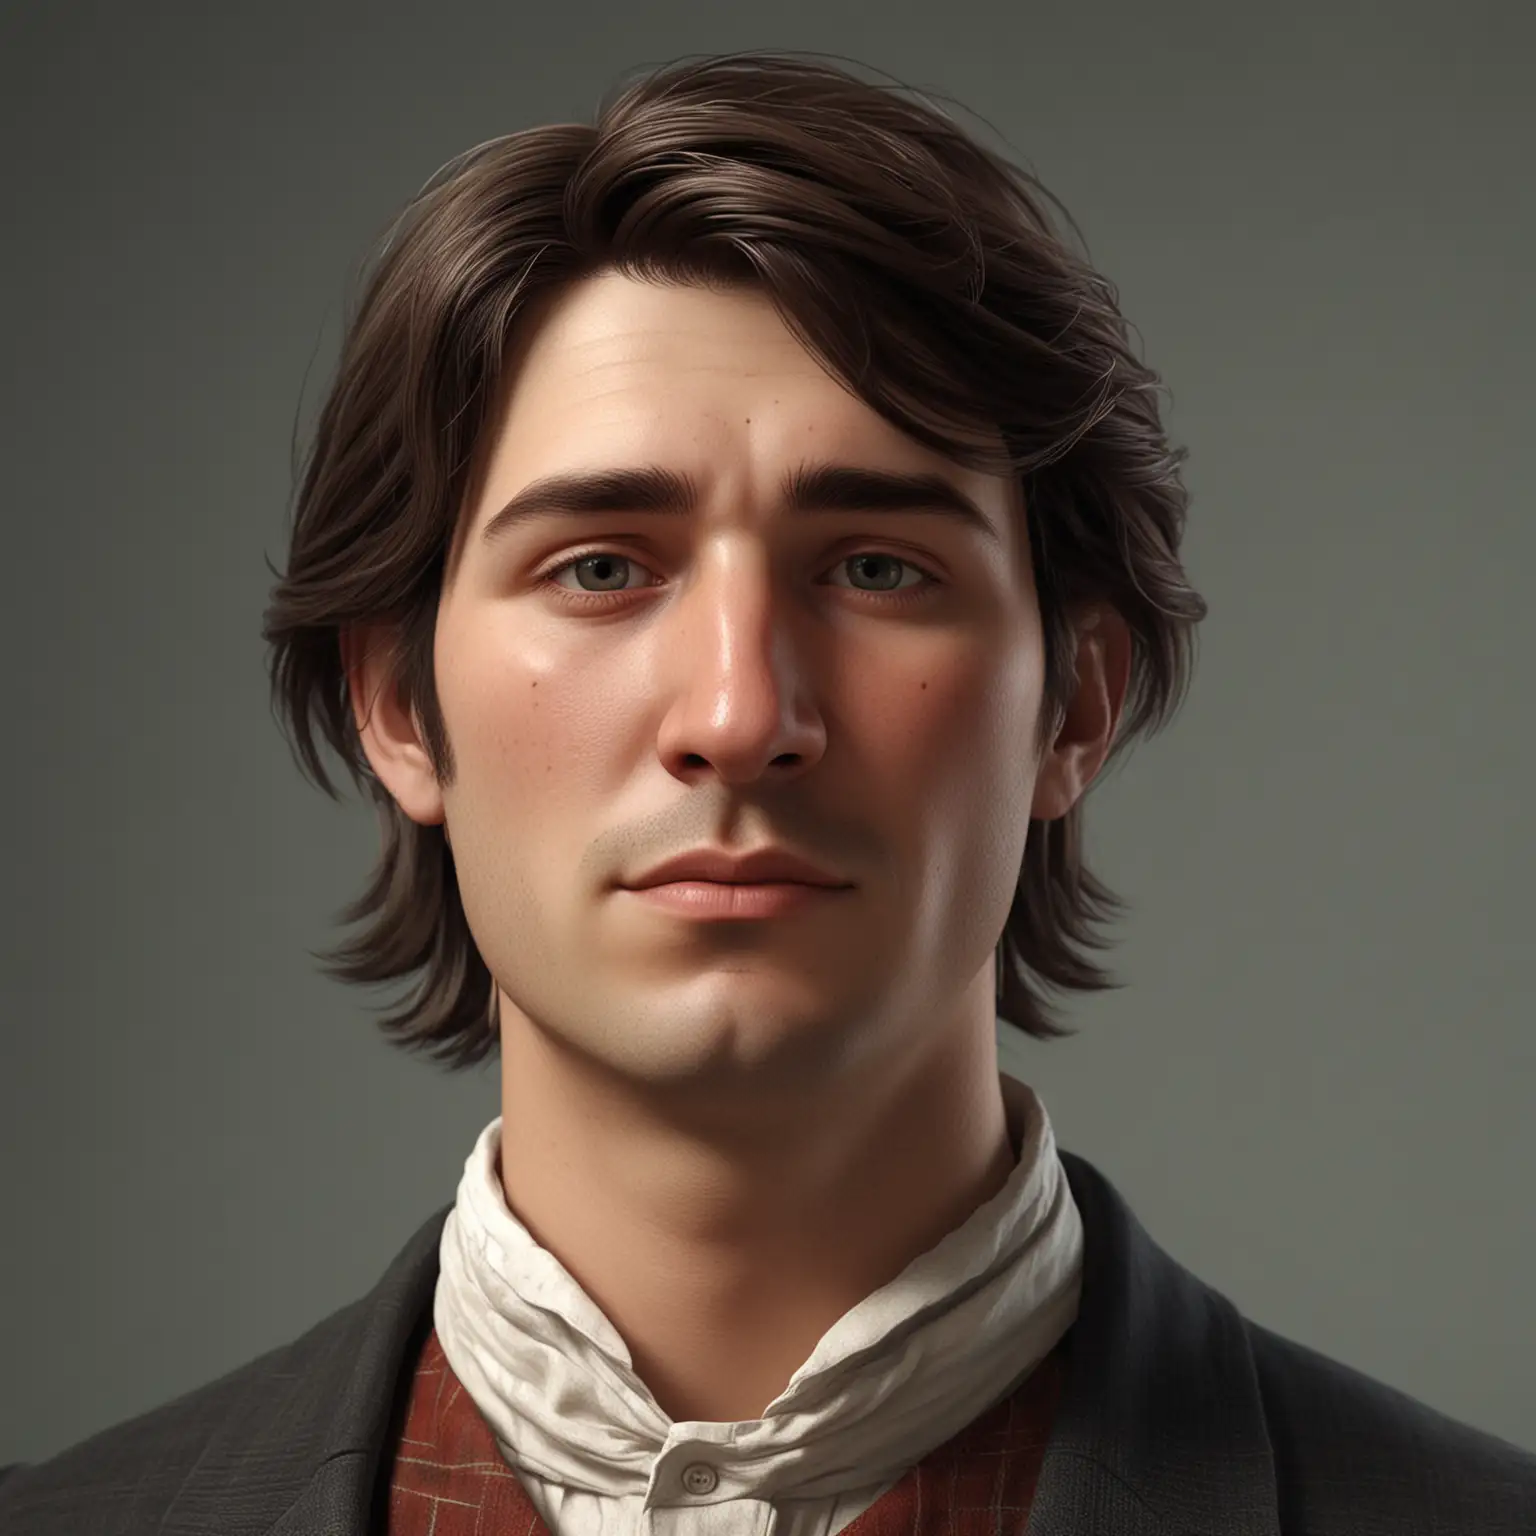 Portrait of a Gentleman with Chubby Cheeks and Vintage Attire